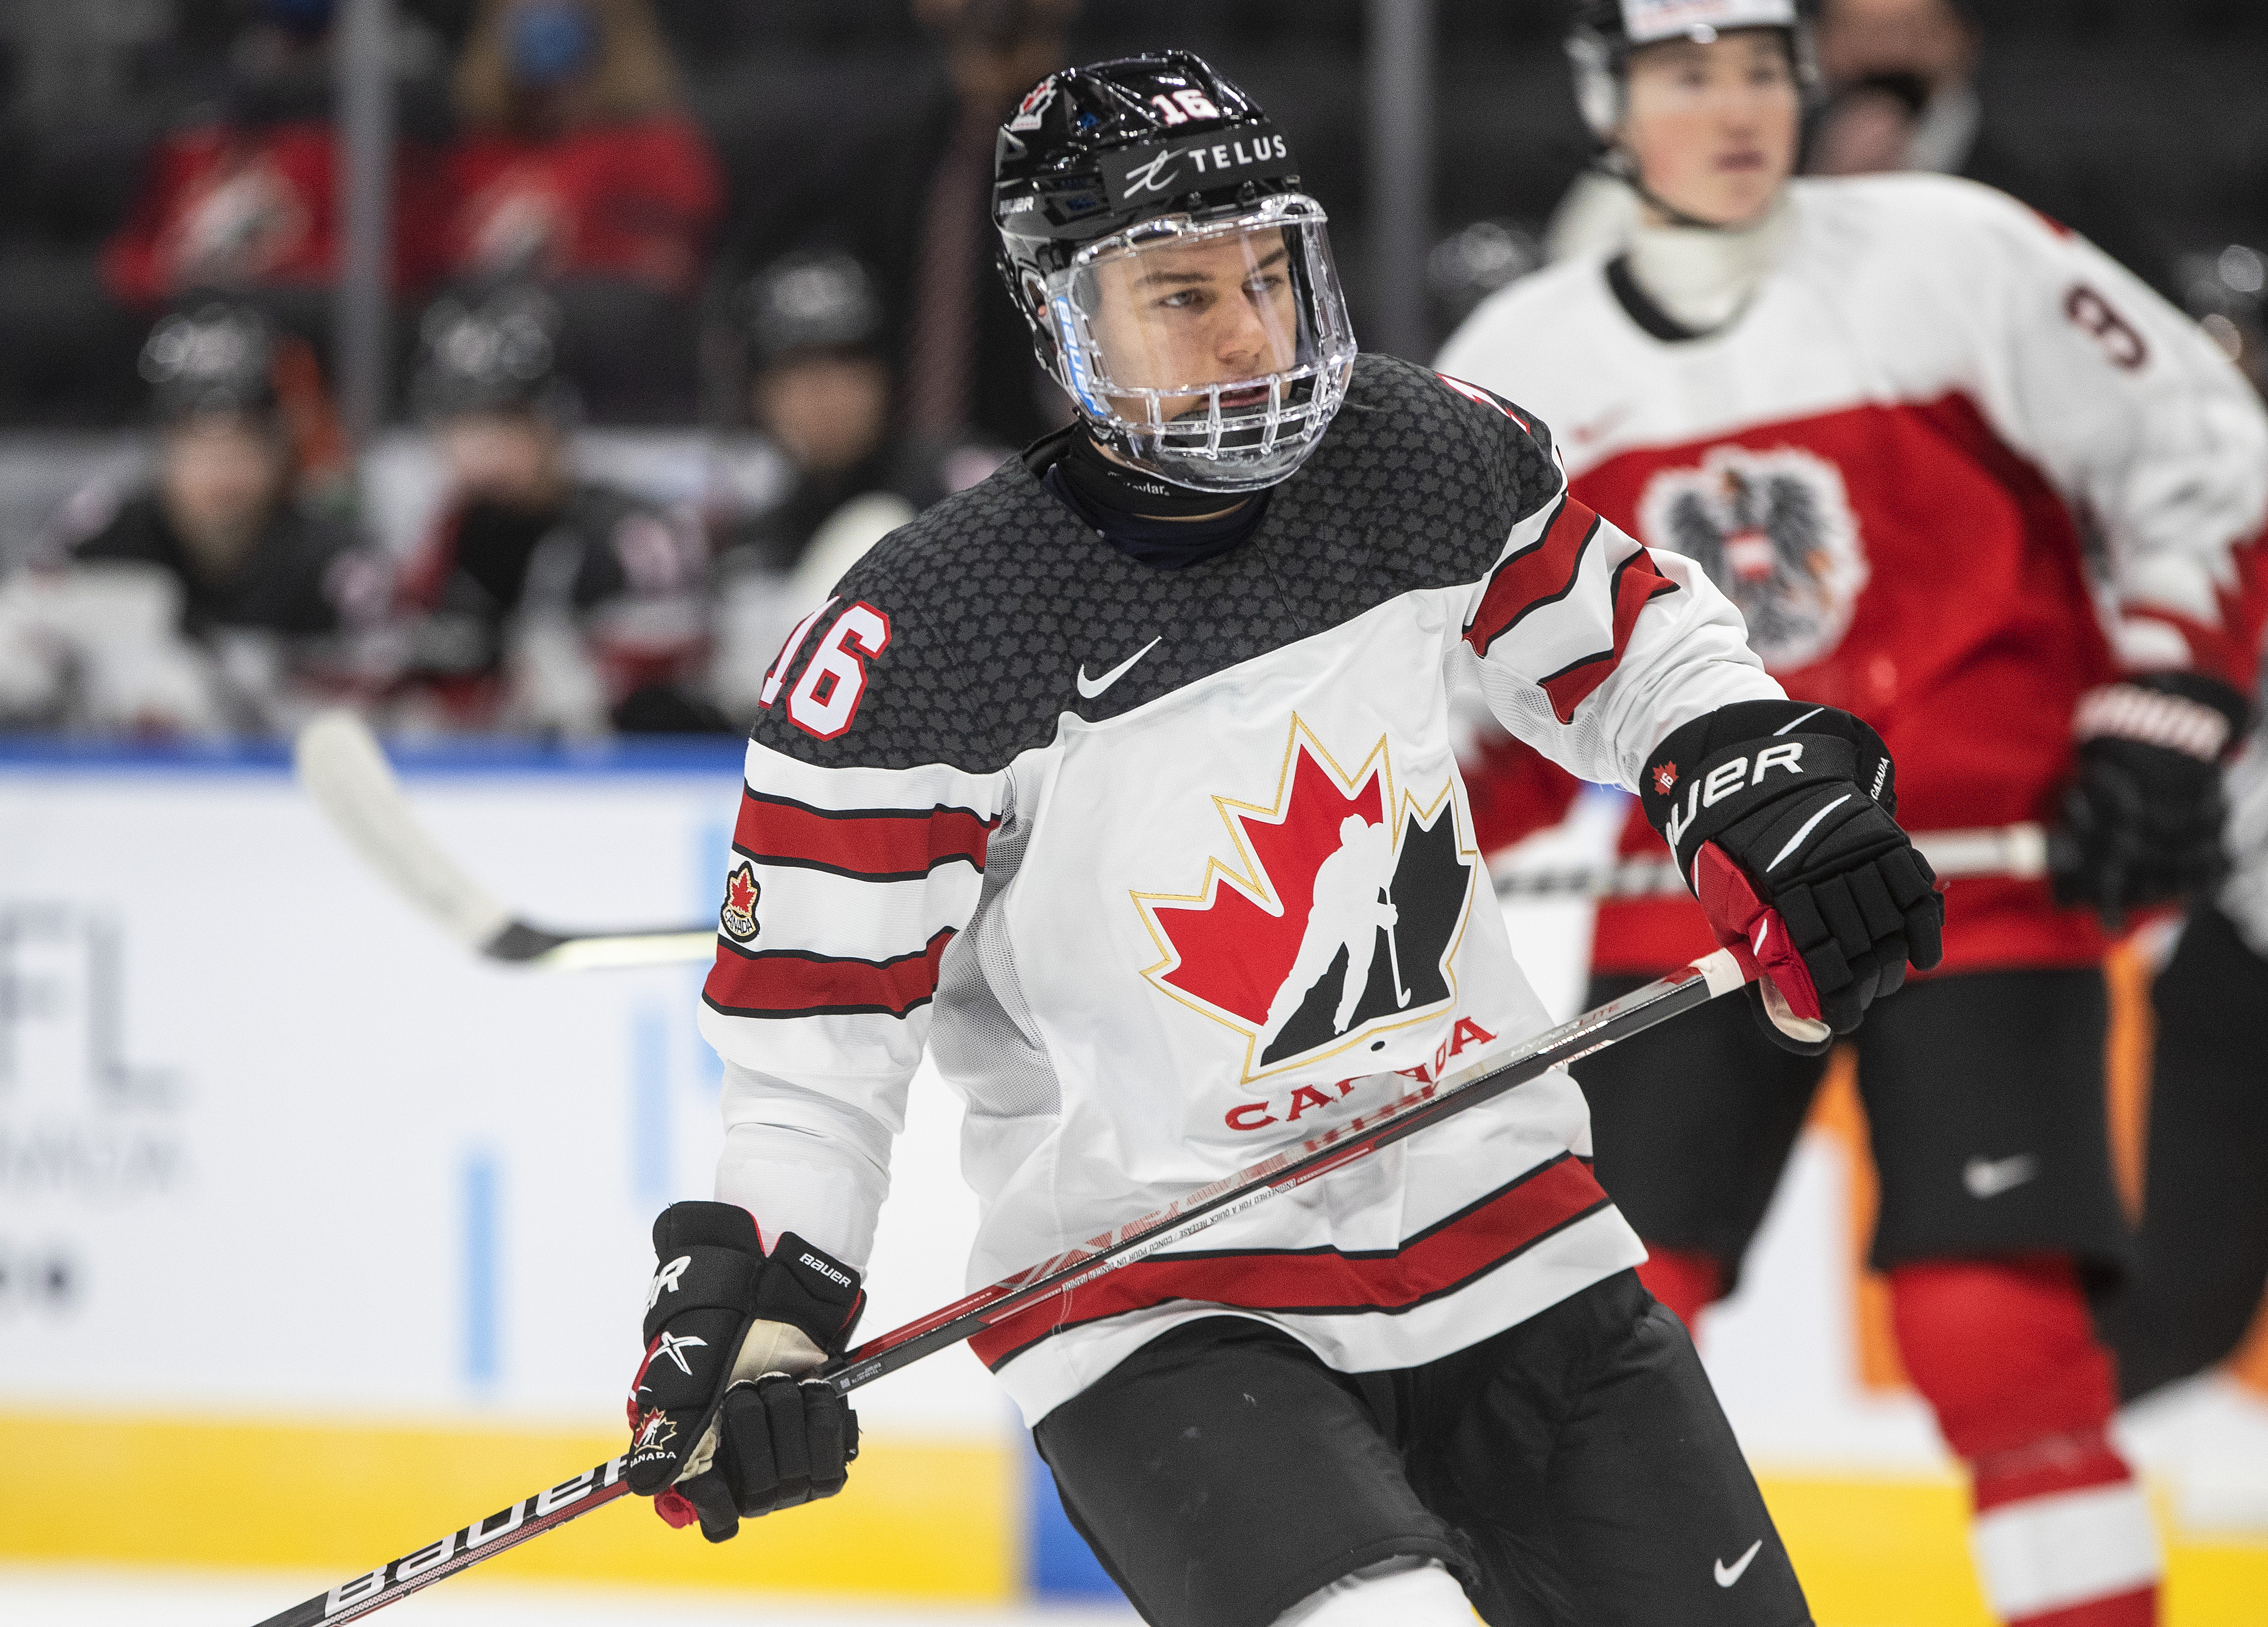 Connor Bedard, Family comes first for projected No. 1 NHL draft pick